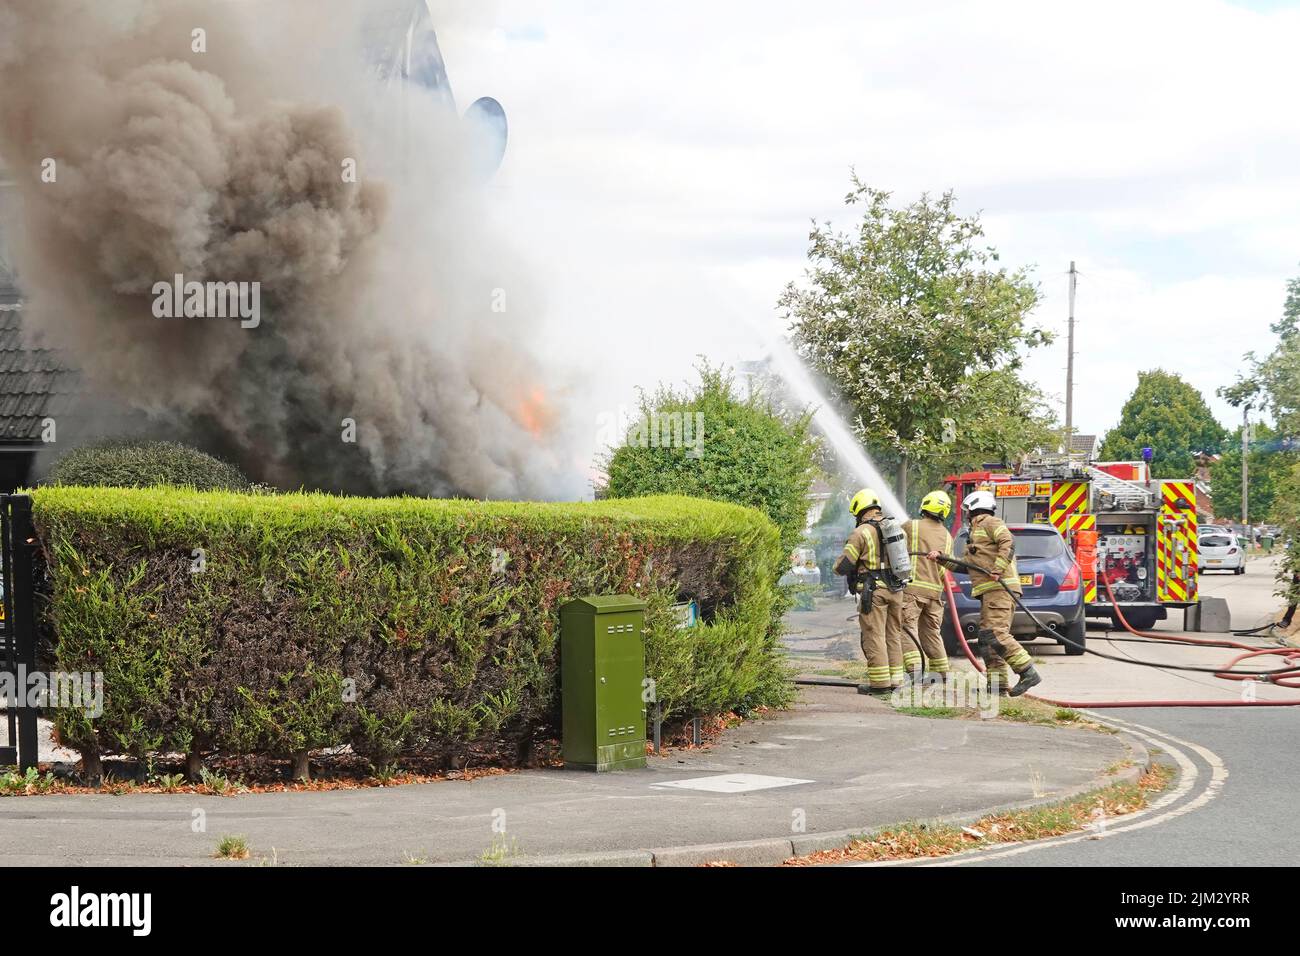 Billowing smoke & flames as group of firemen aim water jet at house front & side walls Essex Fire & Rescue tender residential road Essex England UK Stock Photo